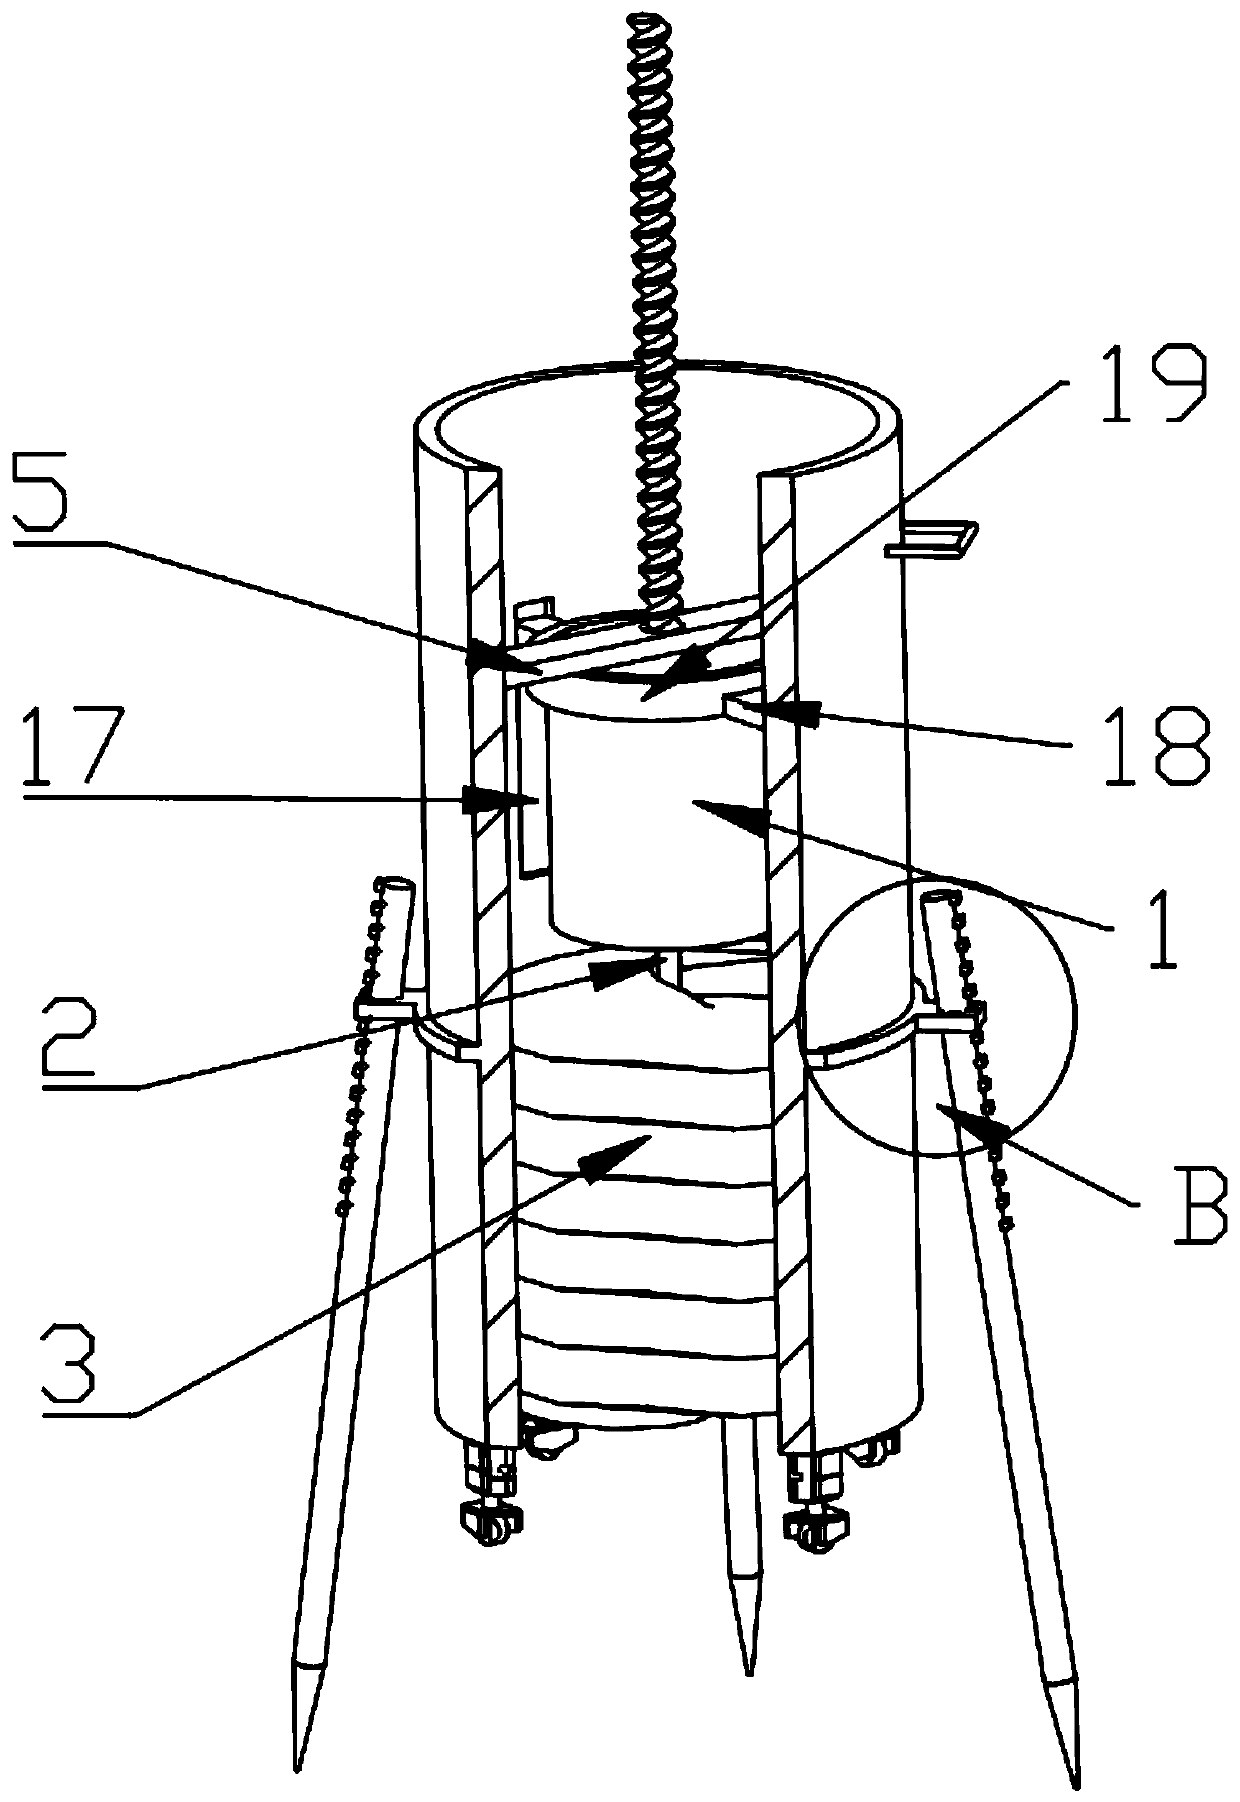 Soil loosening device suitable for planting trees in special-shaped mountain landforms